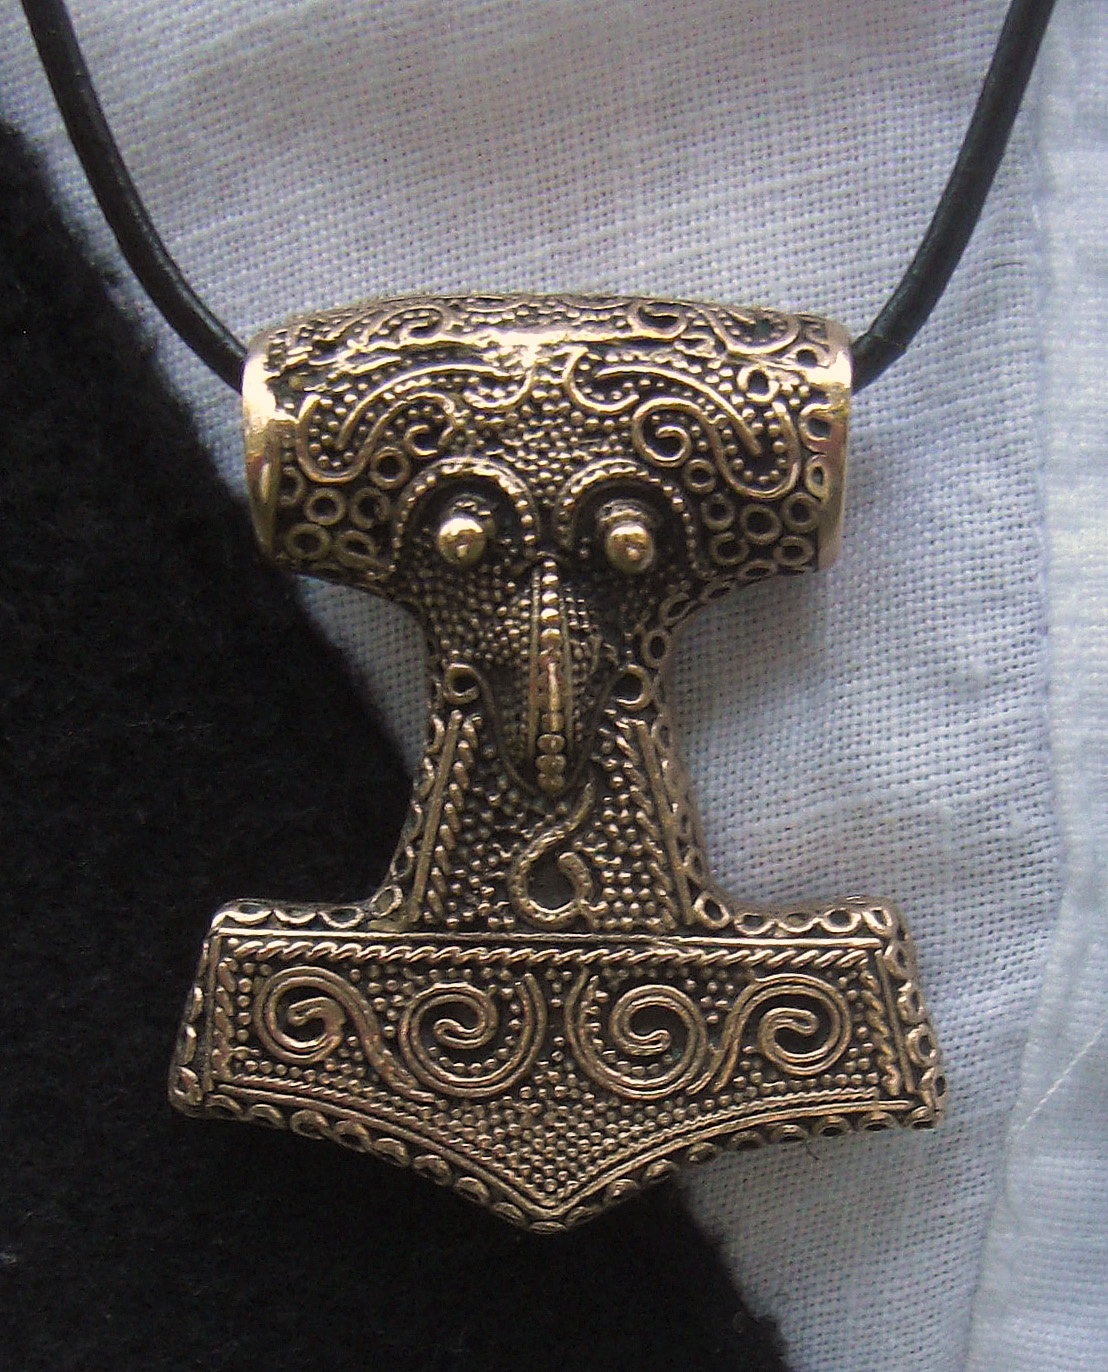 Amulet Thor's hammer (copy of find from Skåne) 2010-07-10